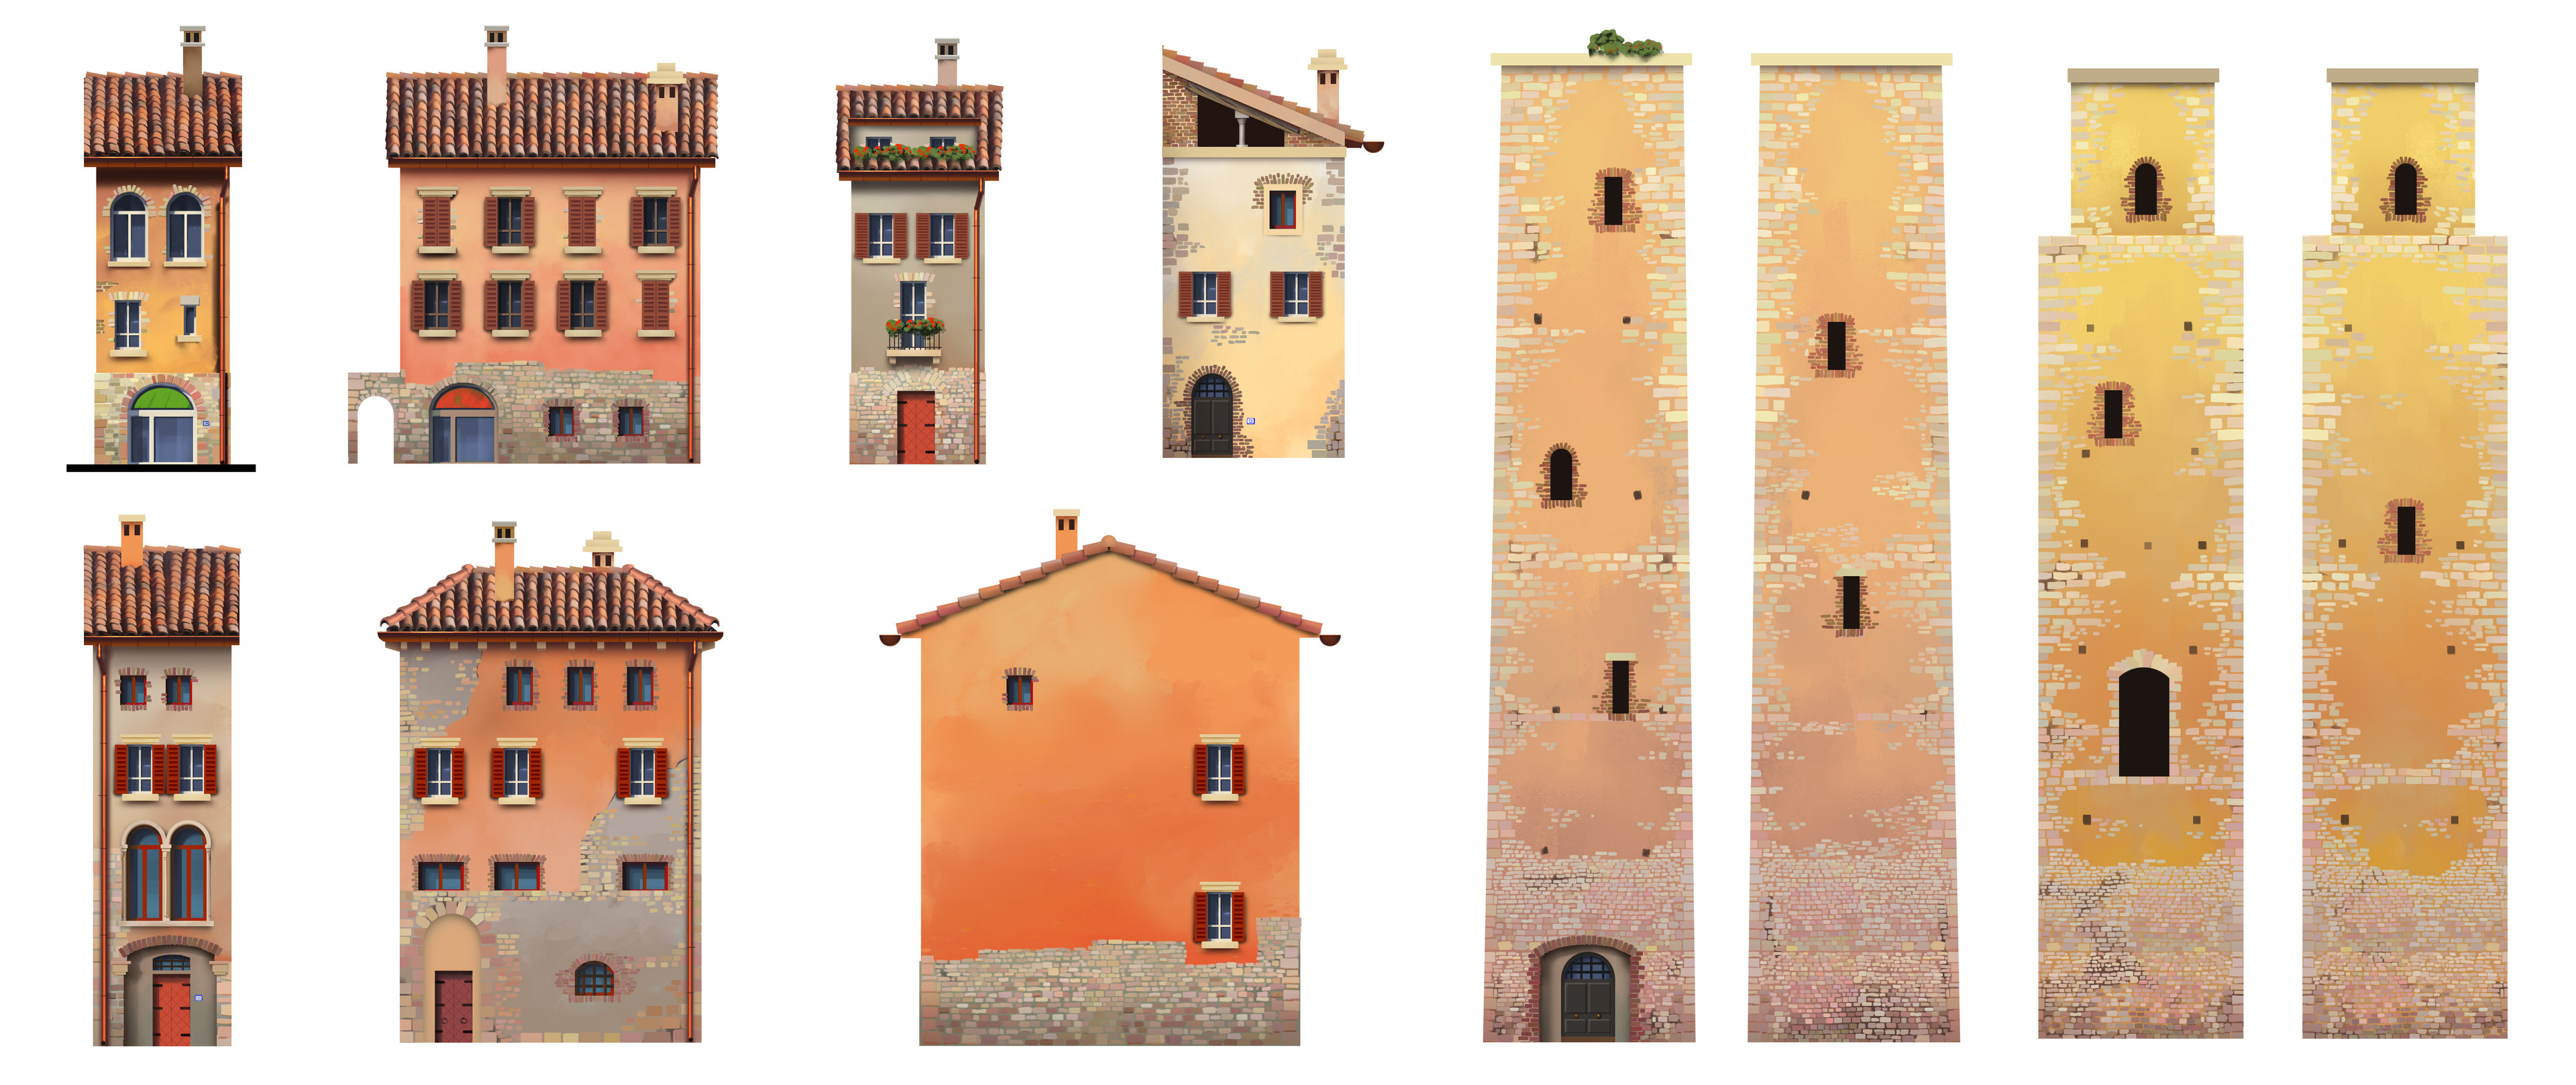 Final textures of the buildings (to be projected onto 3d geometry)